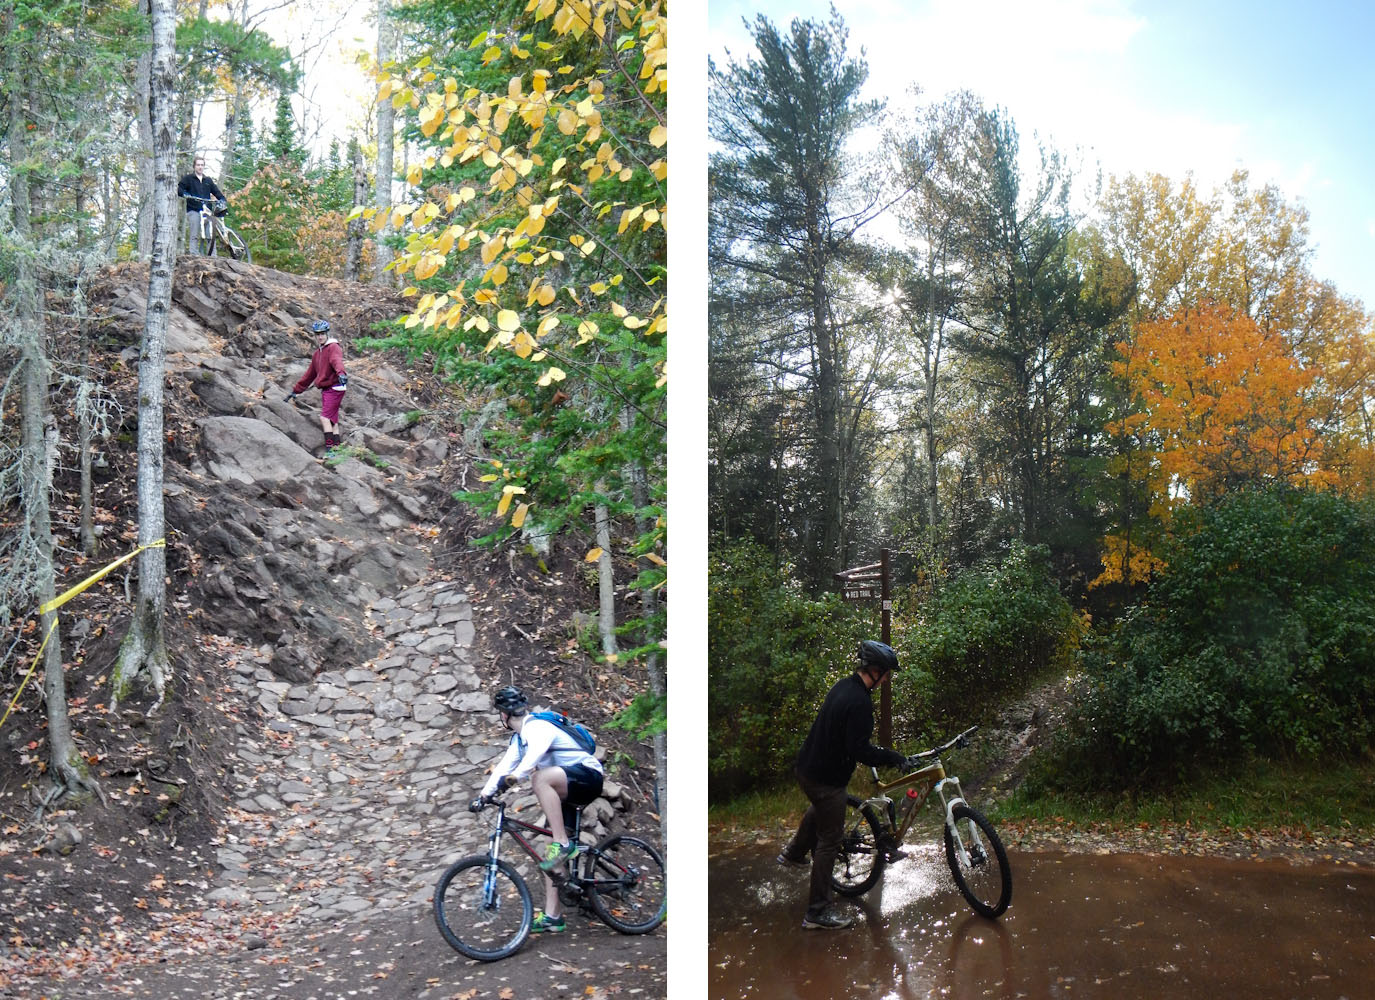 The insane rock face dubbed "Man pants" on the new Overflow downhill MTB trail at Copper Harbor